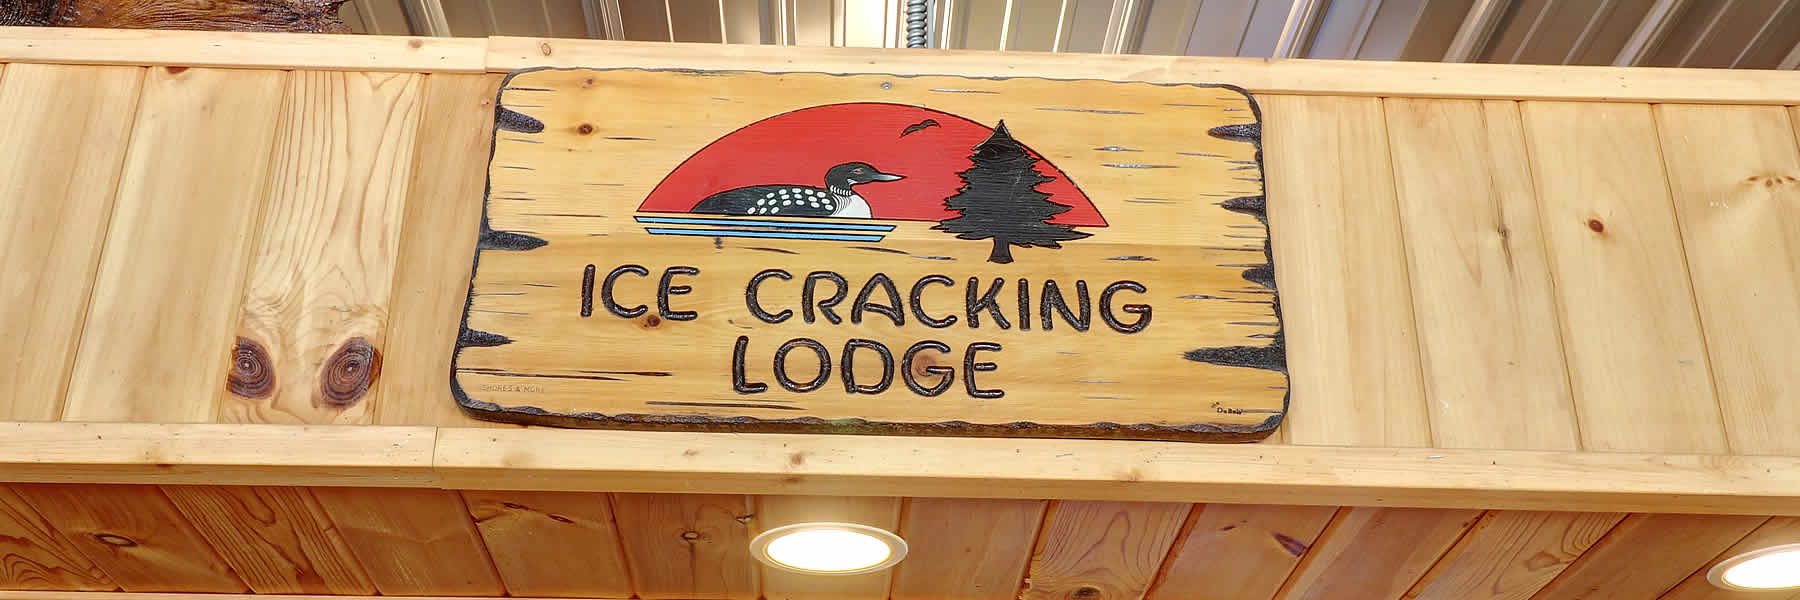 Enjoy great food, drinks, and service at the Ice Cracking Lodge in Ponsford, Minnesota.